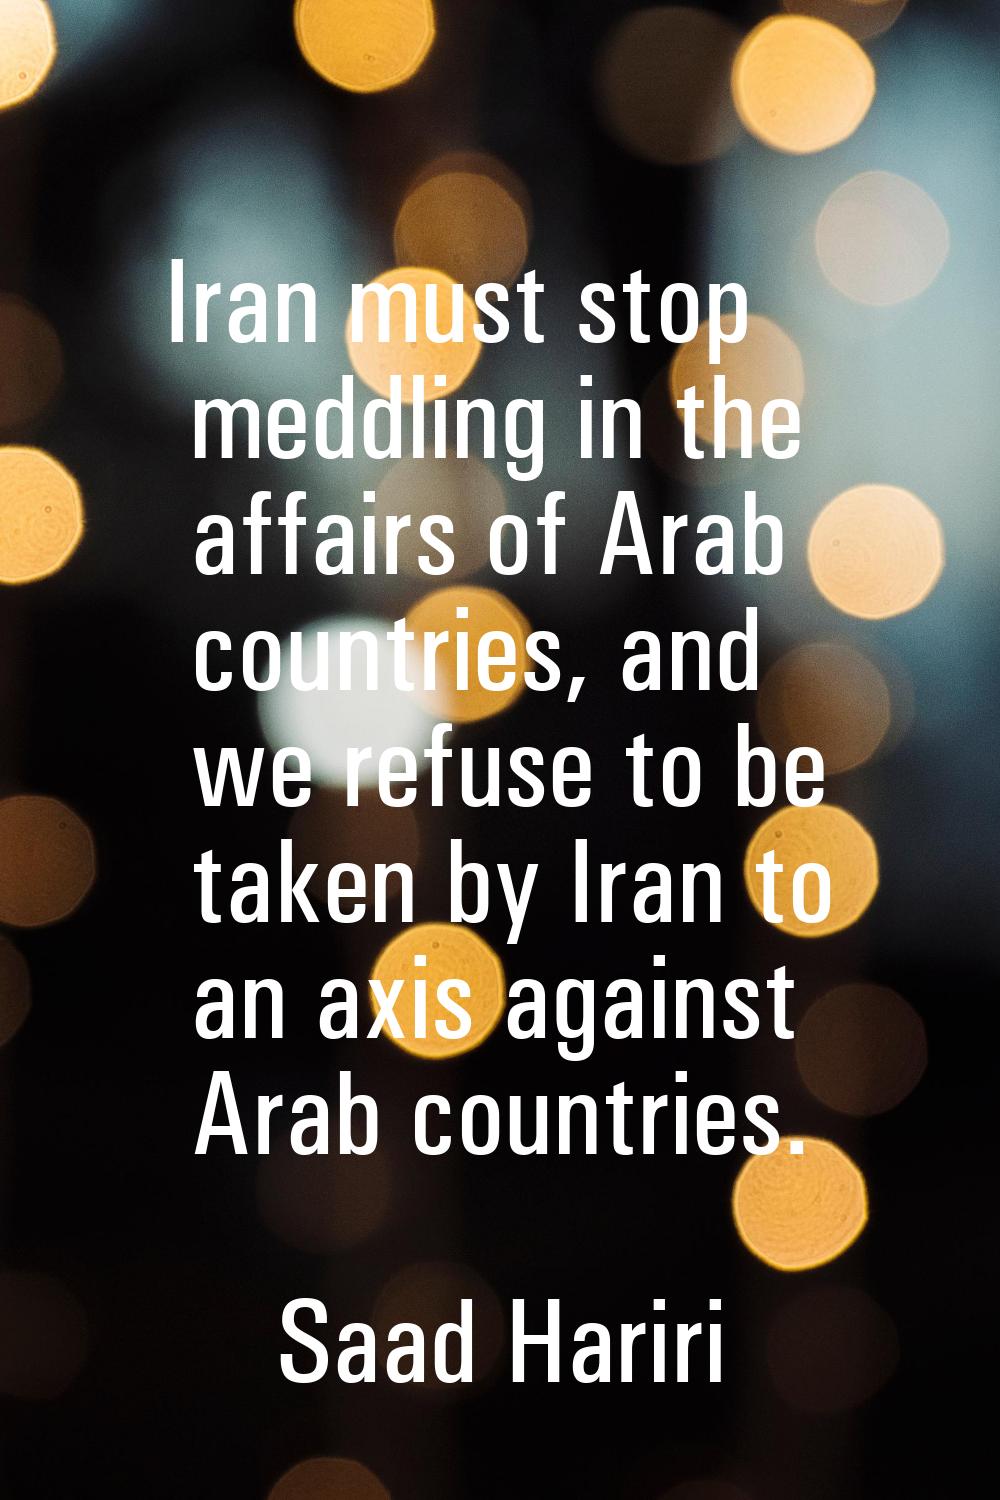 Iran must stop meddling in the affairs of Arab countries, and we refuse to be taken by Iran to an a